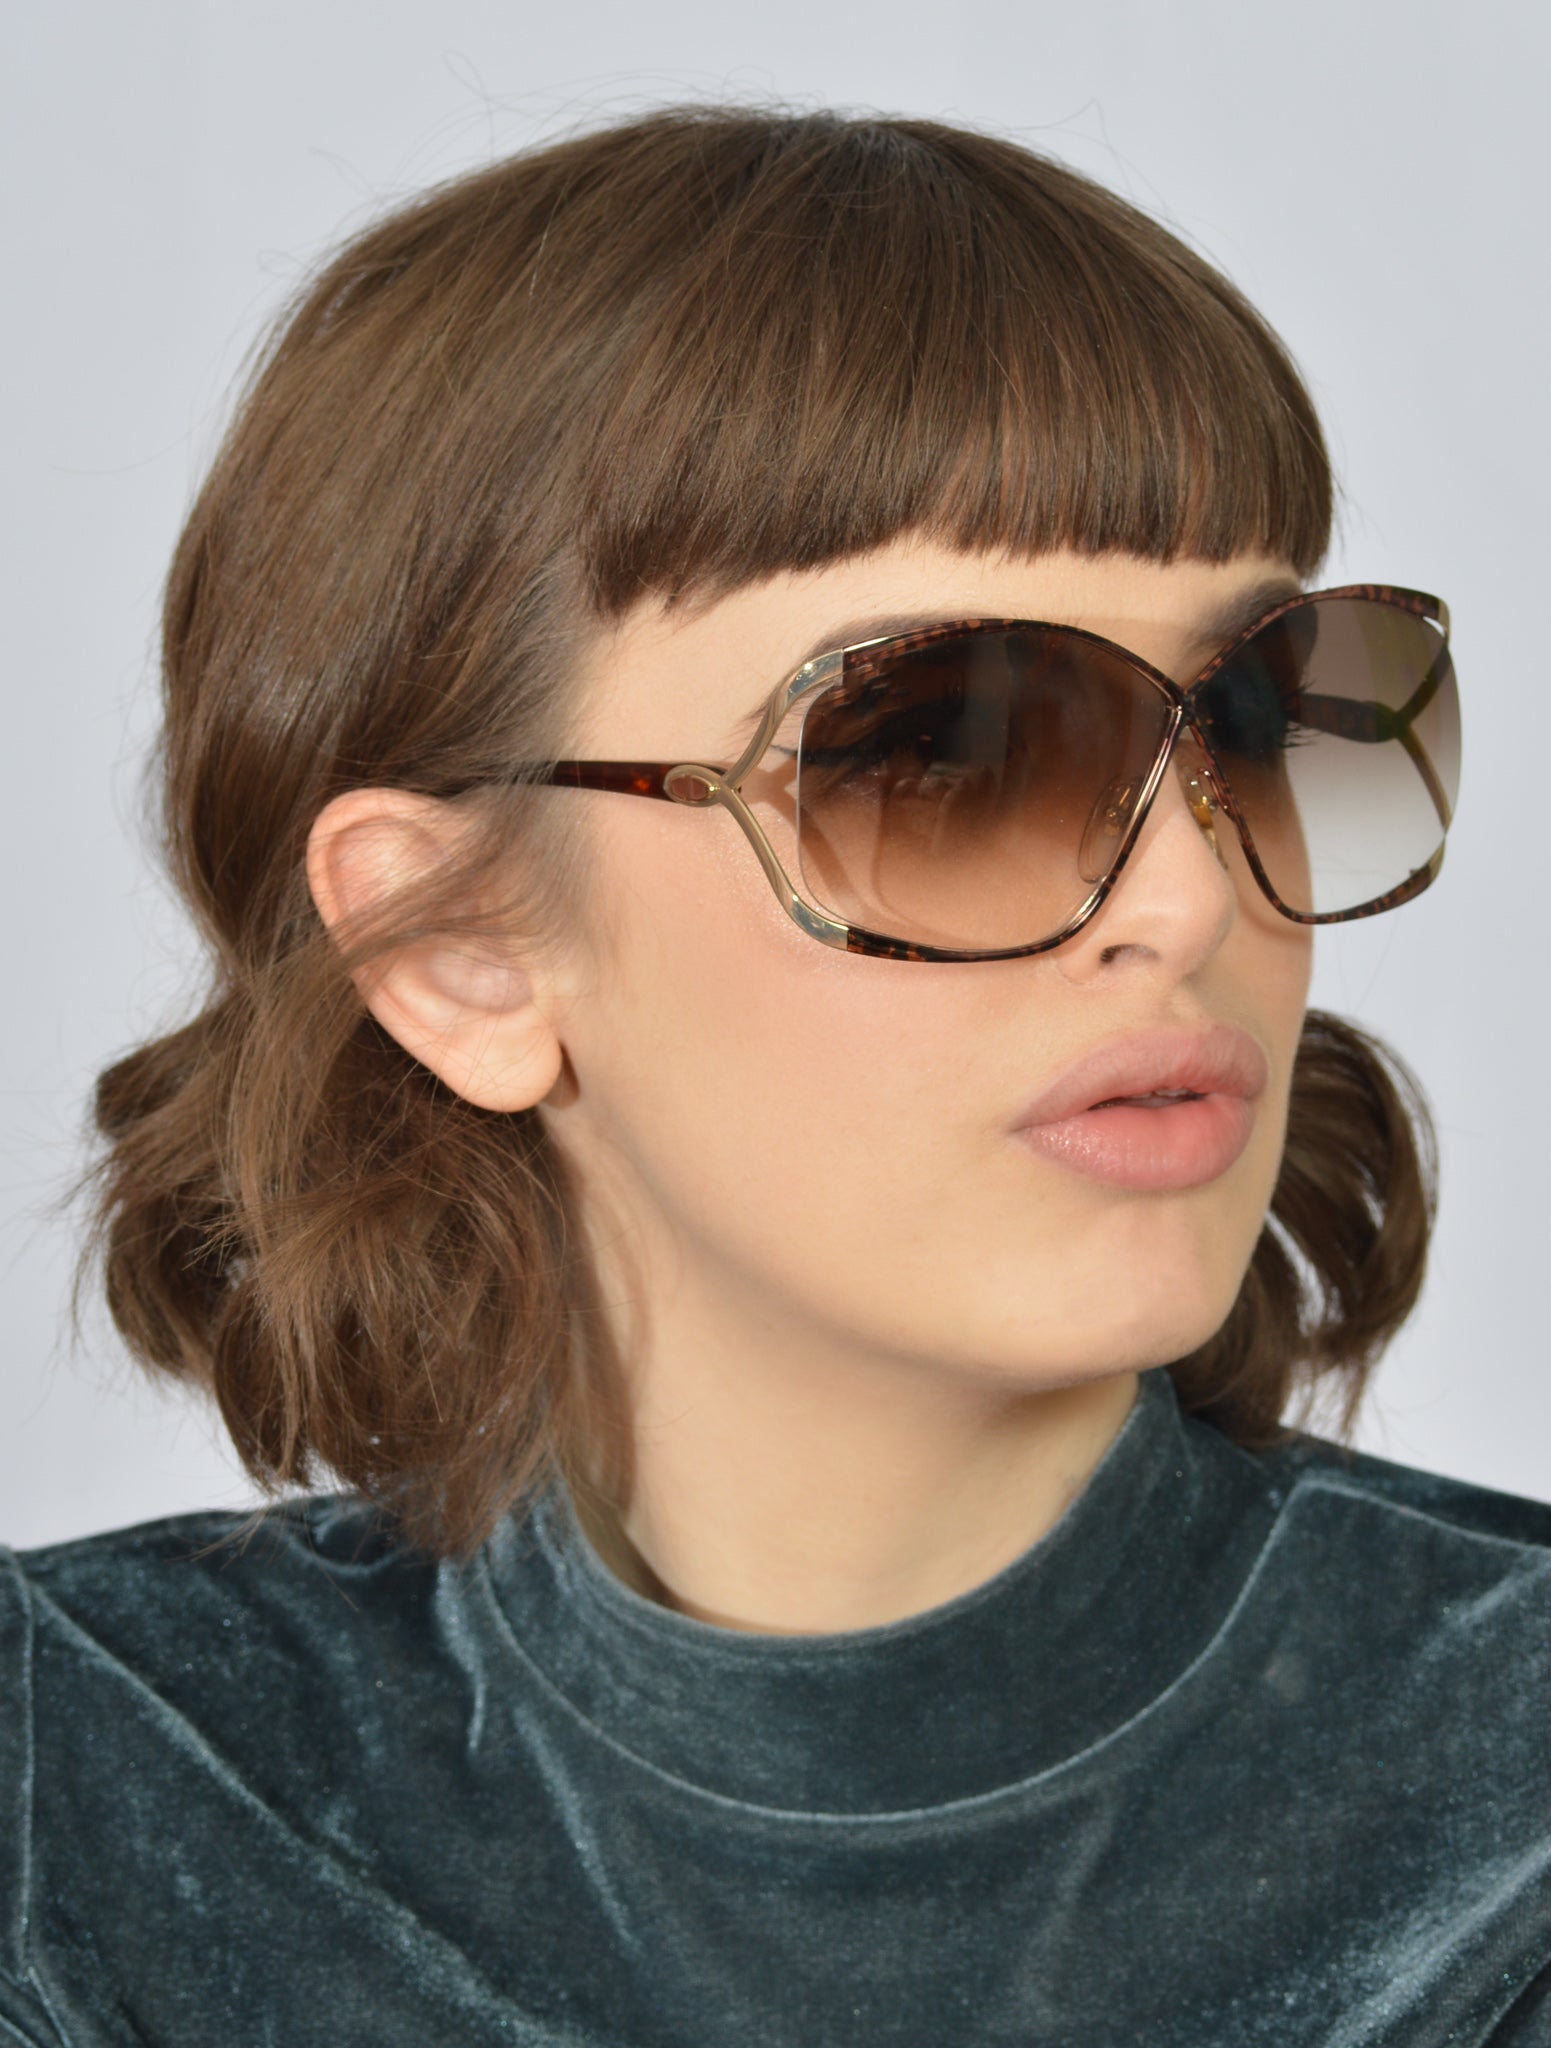 Christian Dior 2056 vintage sunglasses. As seen on JLo. Dior butterfly sunglasses. Vintage designer sunglasses. Dior sunglasses. Oversized Dior sunglasses.